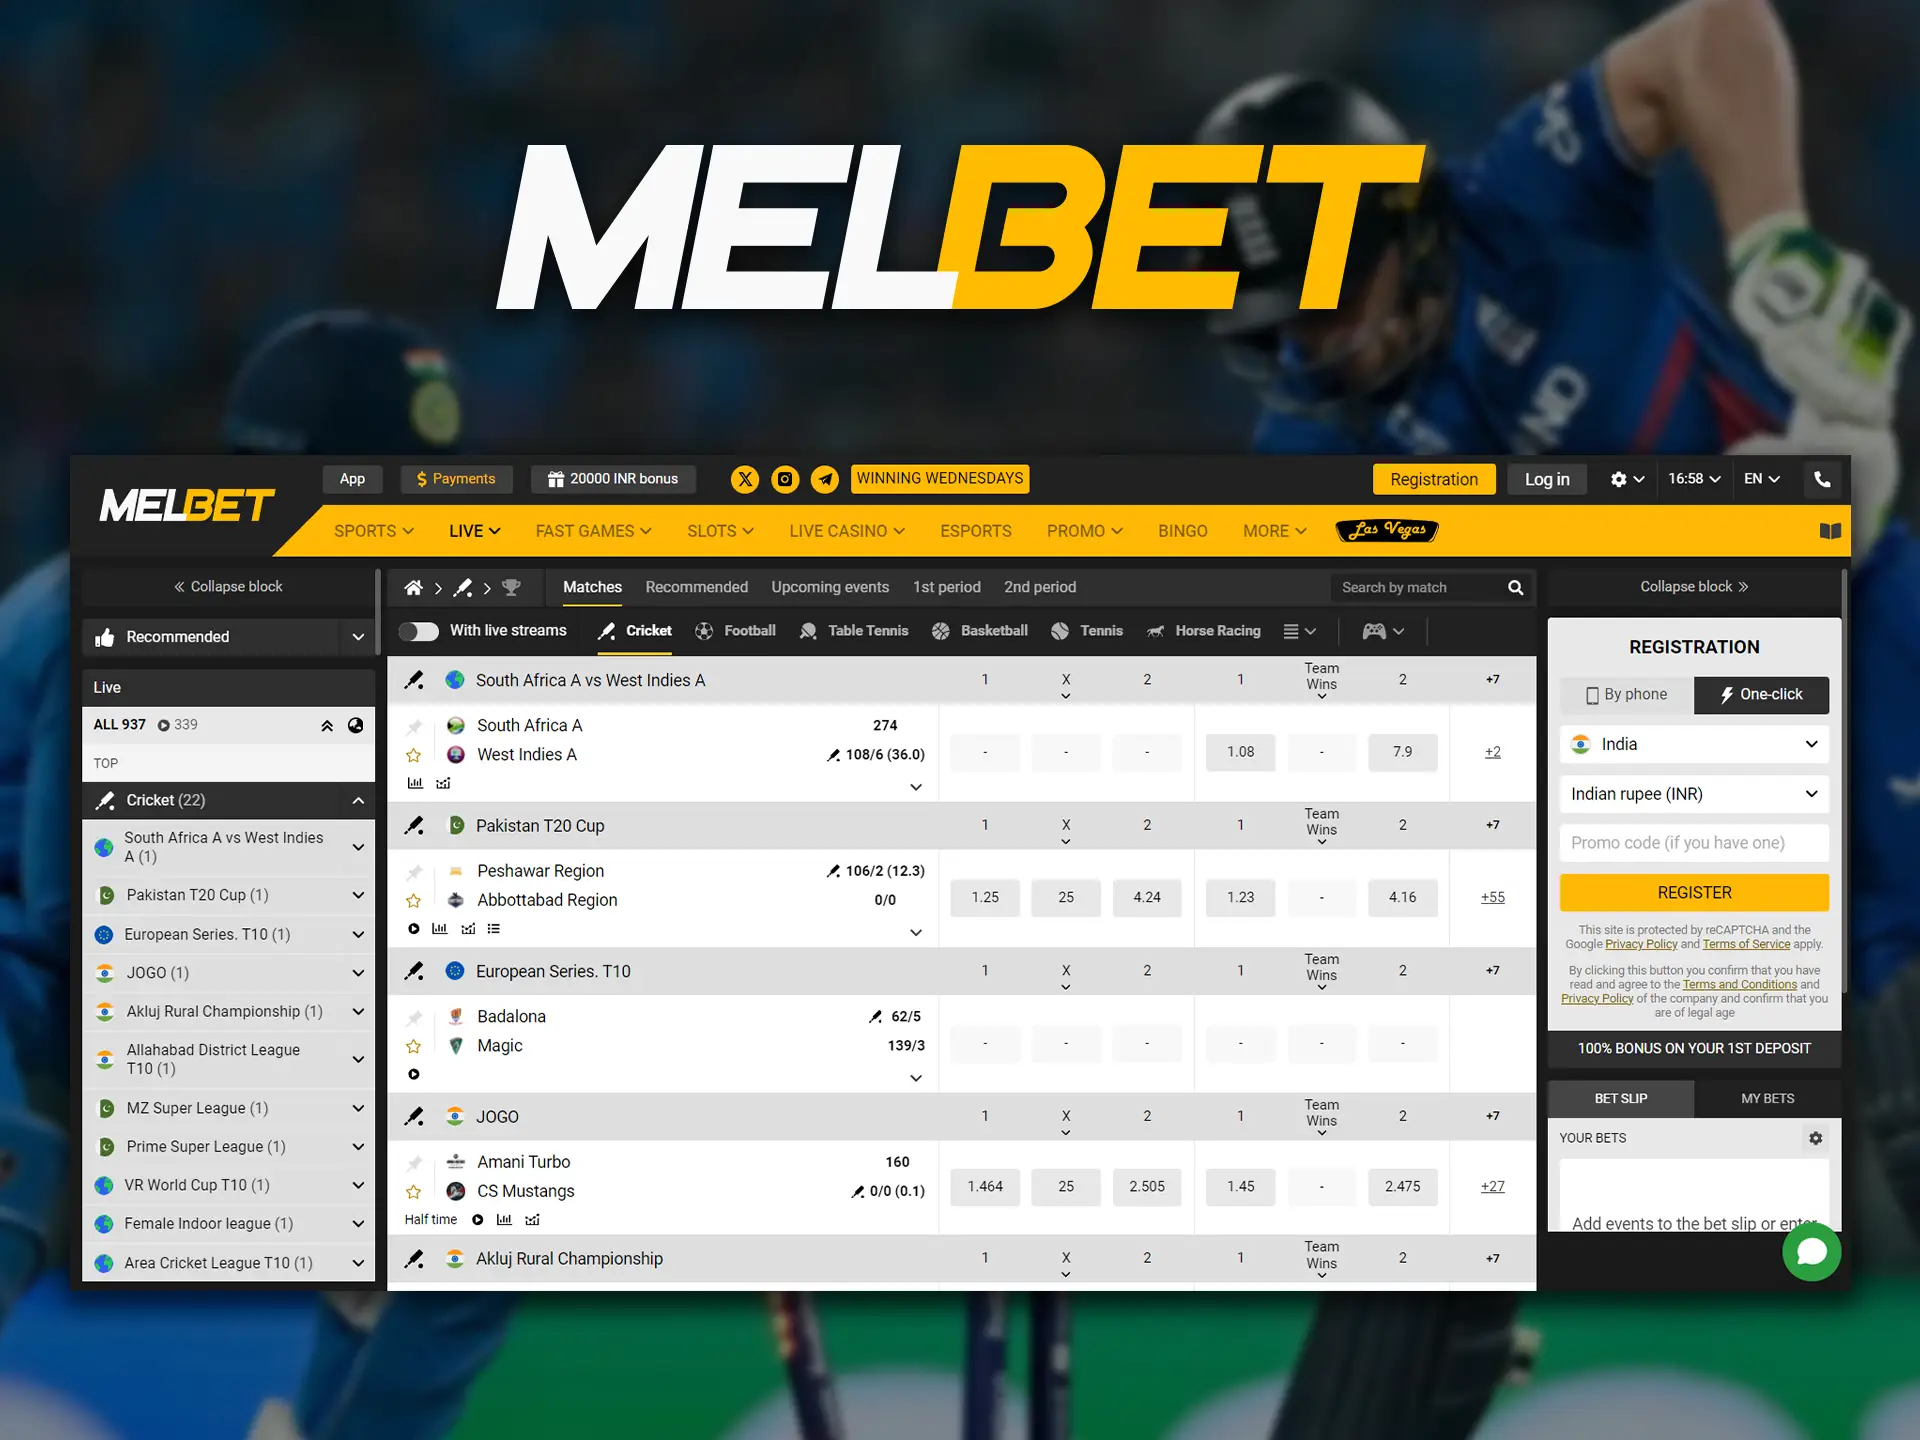 Melbet is the largest and leading online sports betting site.